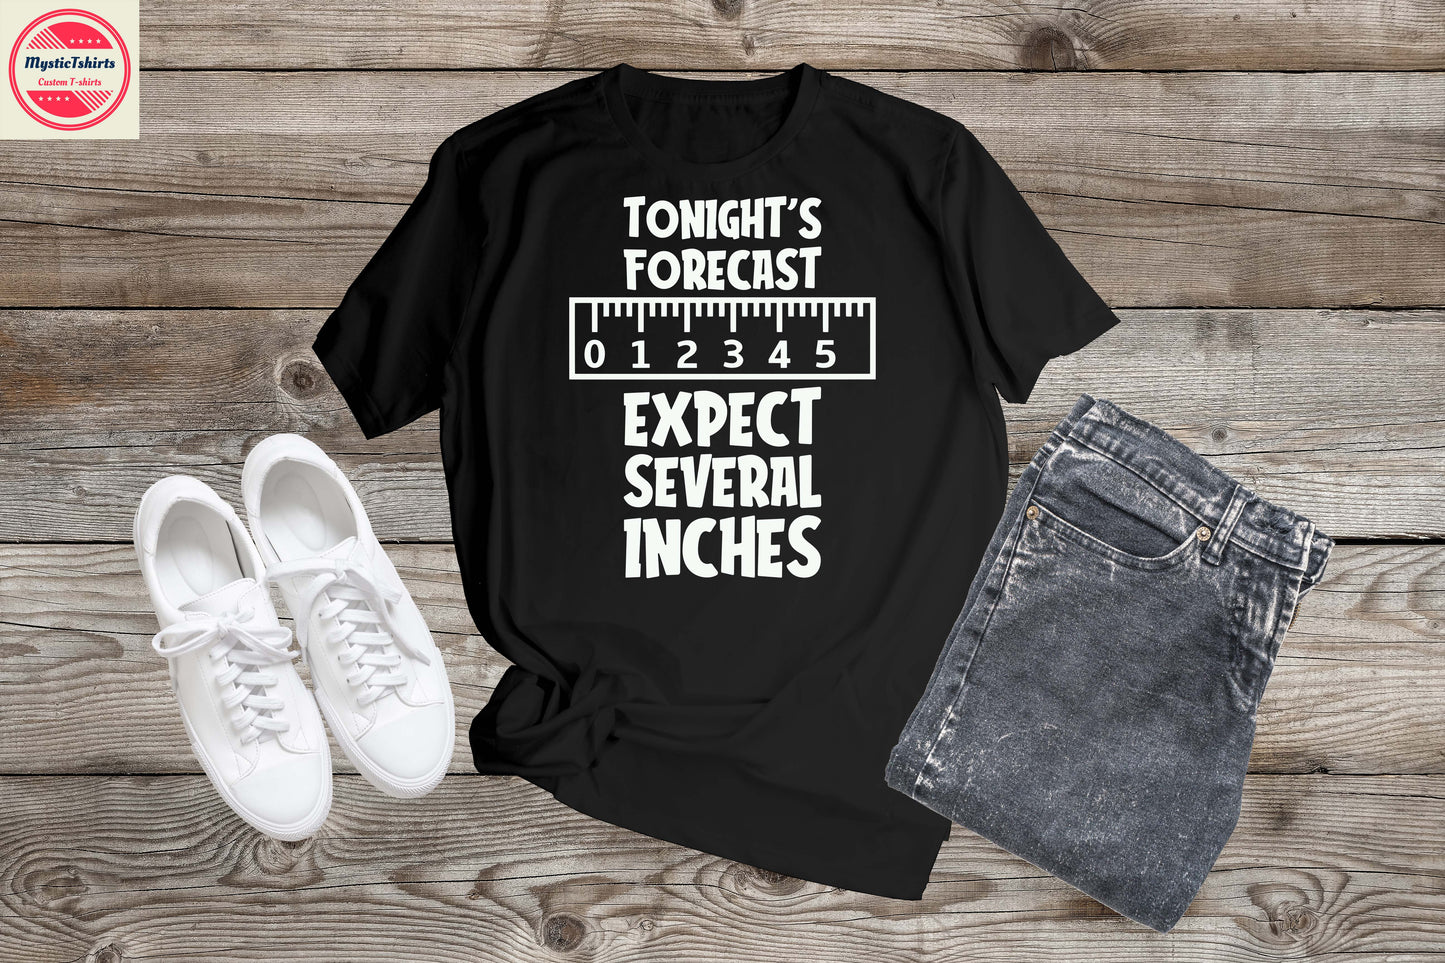 463. TONIGHTS FORCAST, Personalized T-Shirt, Custom Text, Make Your Own Shirt, Custom Tee